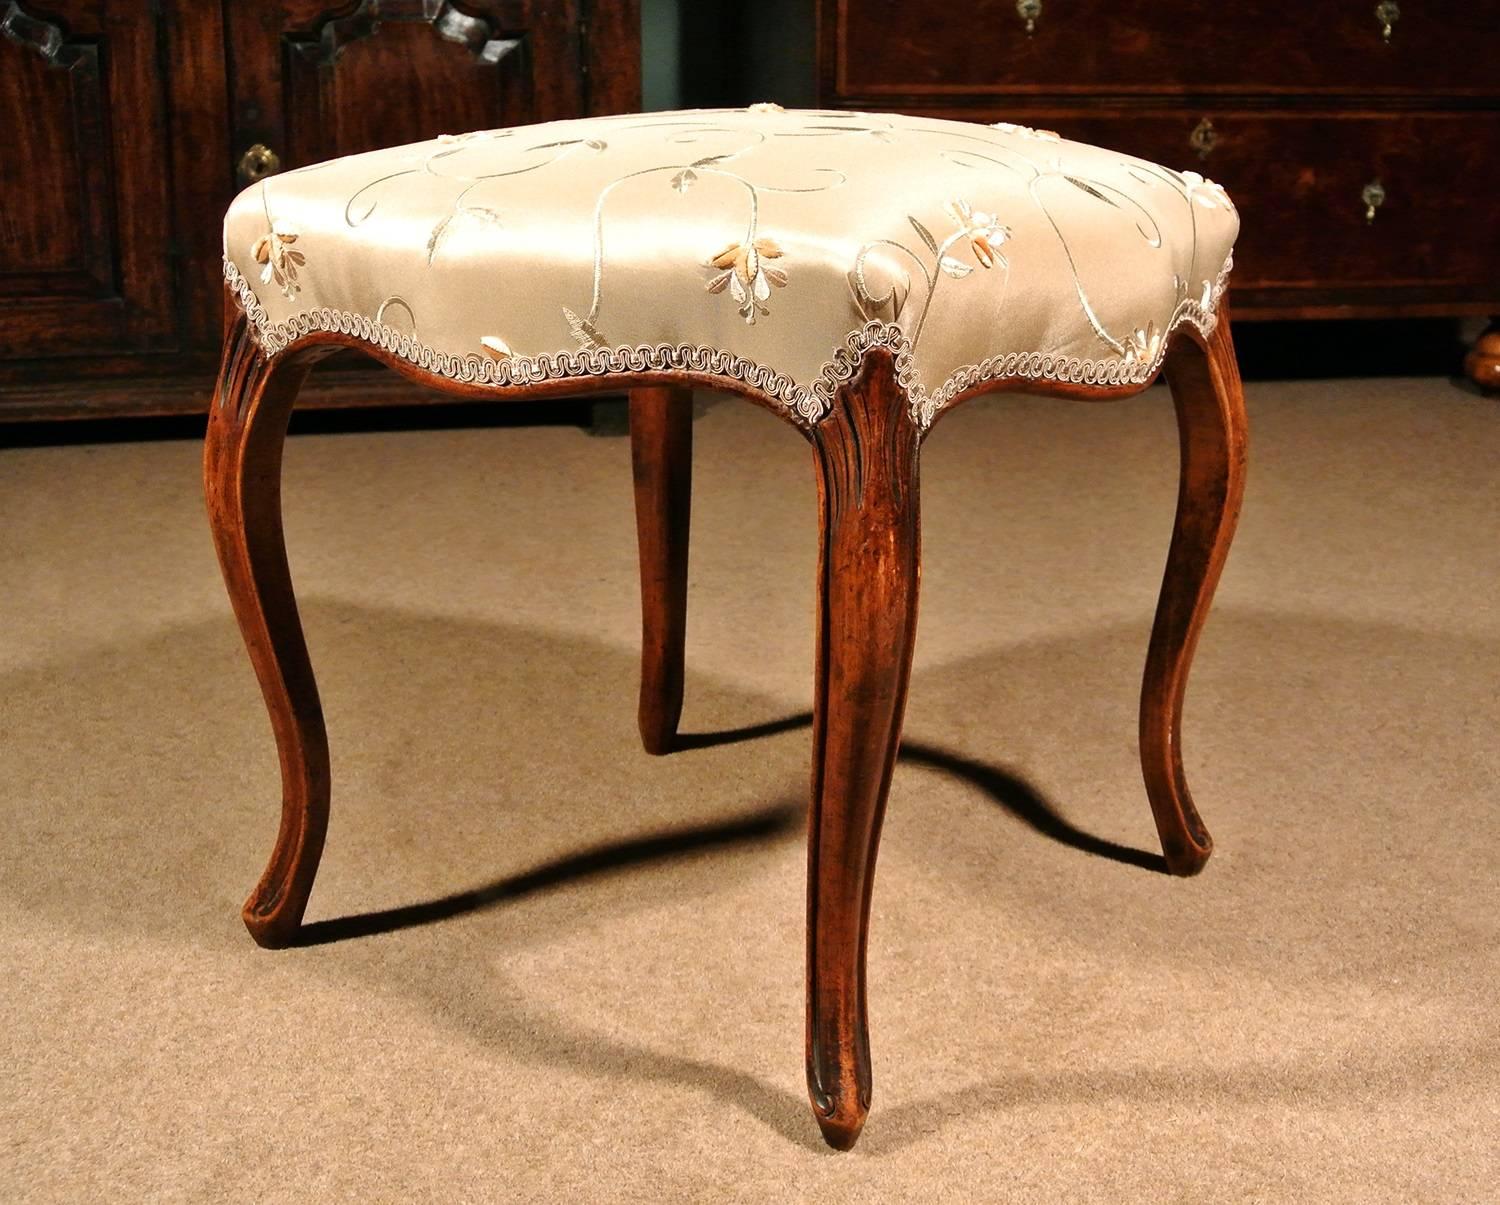 Of excellent color and condition, a very elegant 18th century solid walnut stool.

Beautiful serpentine solid walnut seat rails and long cabriole legs with rolled channel carved borders and scrolled peg toes in the French manner.

The legs